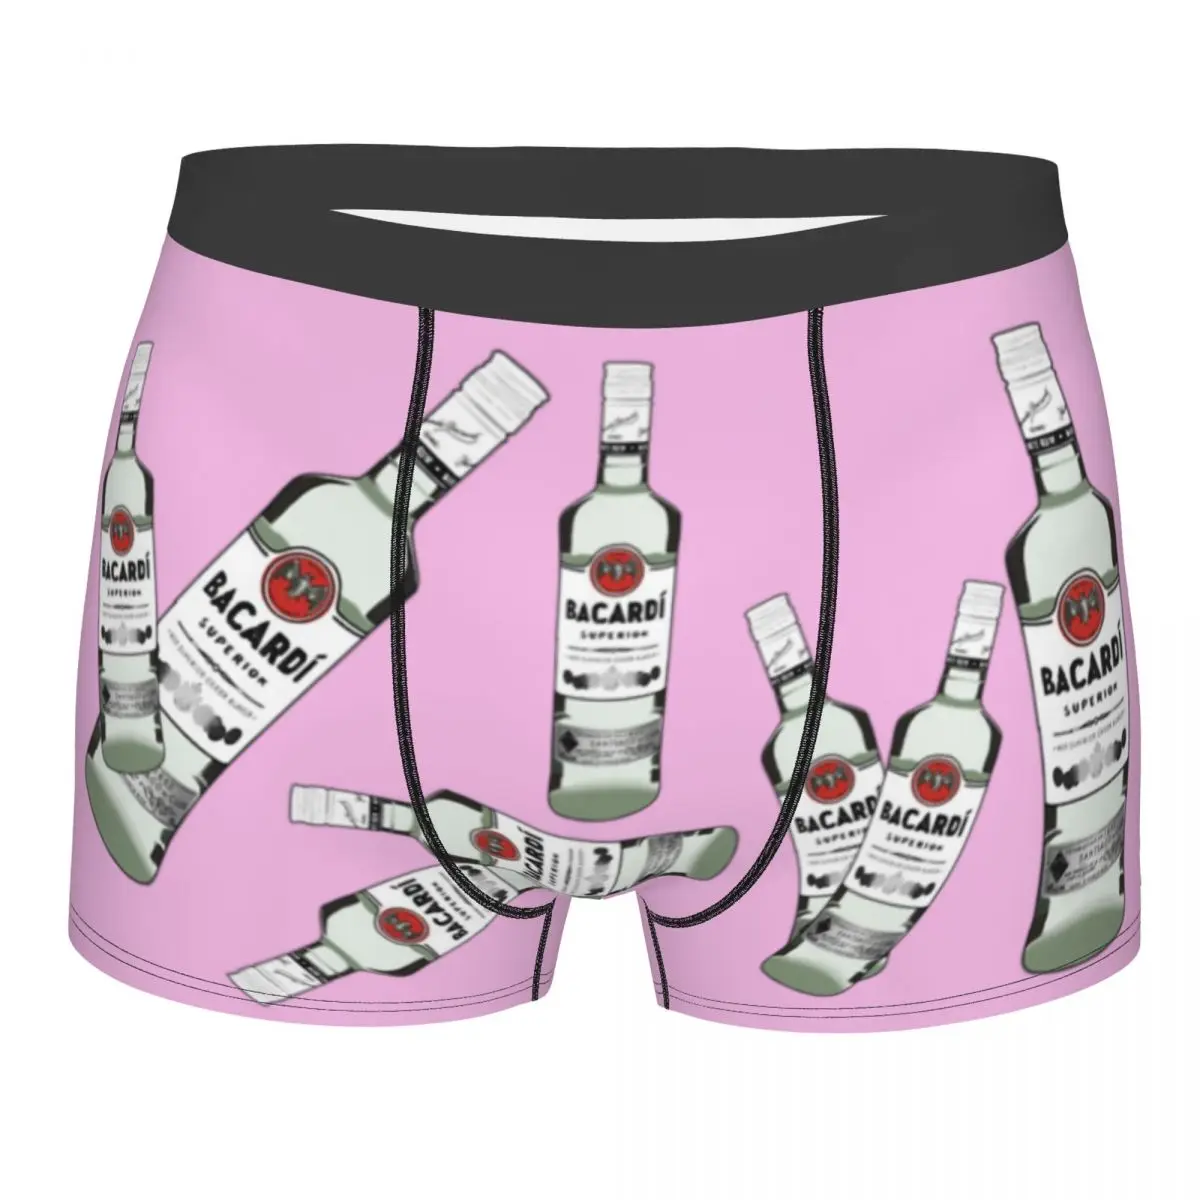 Bacardi Man's Boxer Briefs Underwear Bacardi Highly Breathable High Quality Birthday Gifts funny men s medical nurse anesthesia labels men s briefs highly breathable underwear top quality print shorts birthday gifts